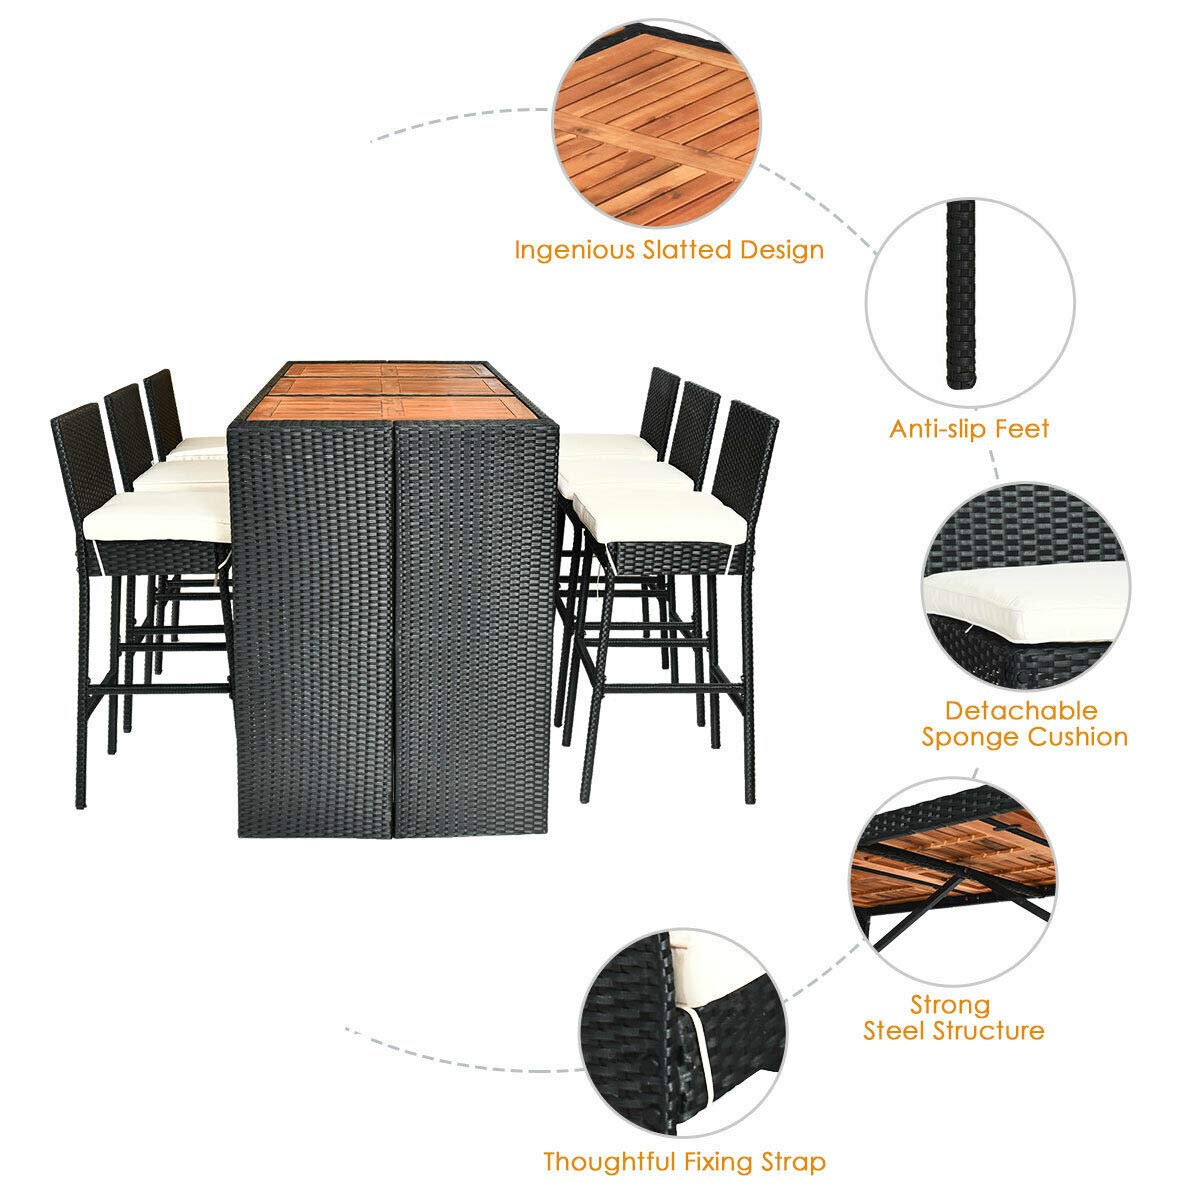 7 PCS Outdoor Dining Set, Patio Wicker Furniture Set with Acacia Wood Table Top and Removable Cushion